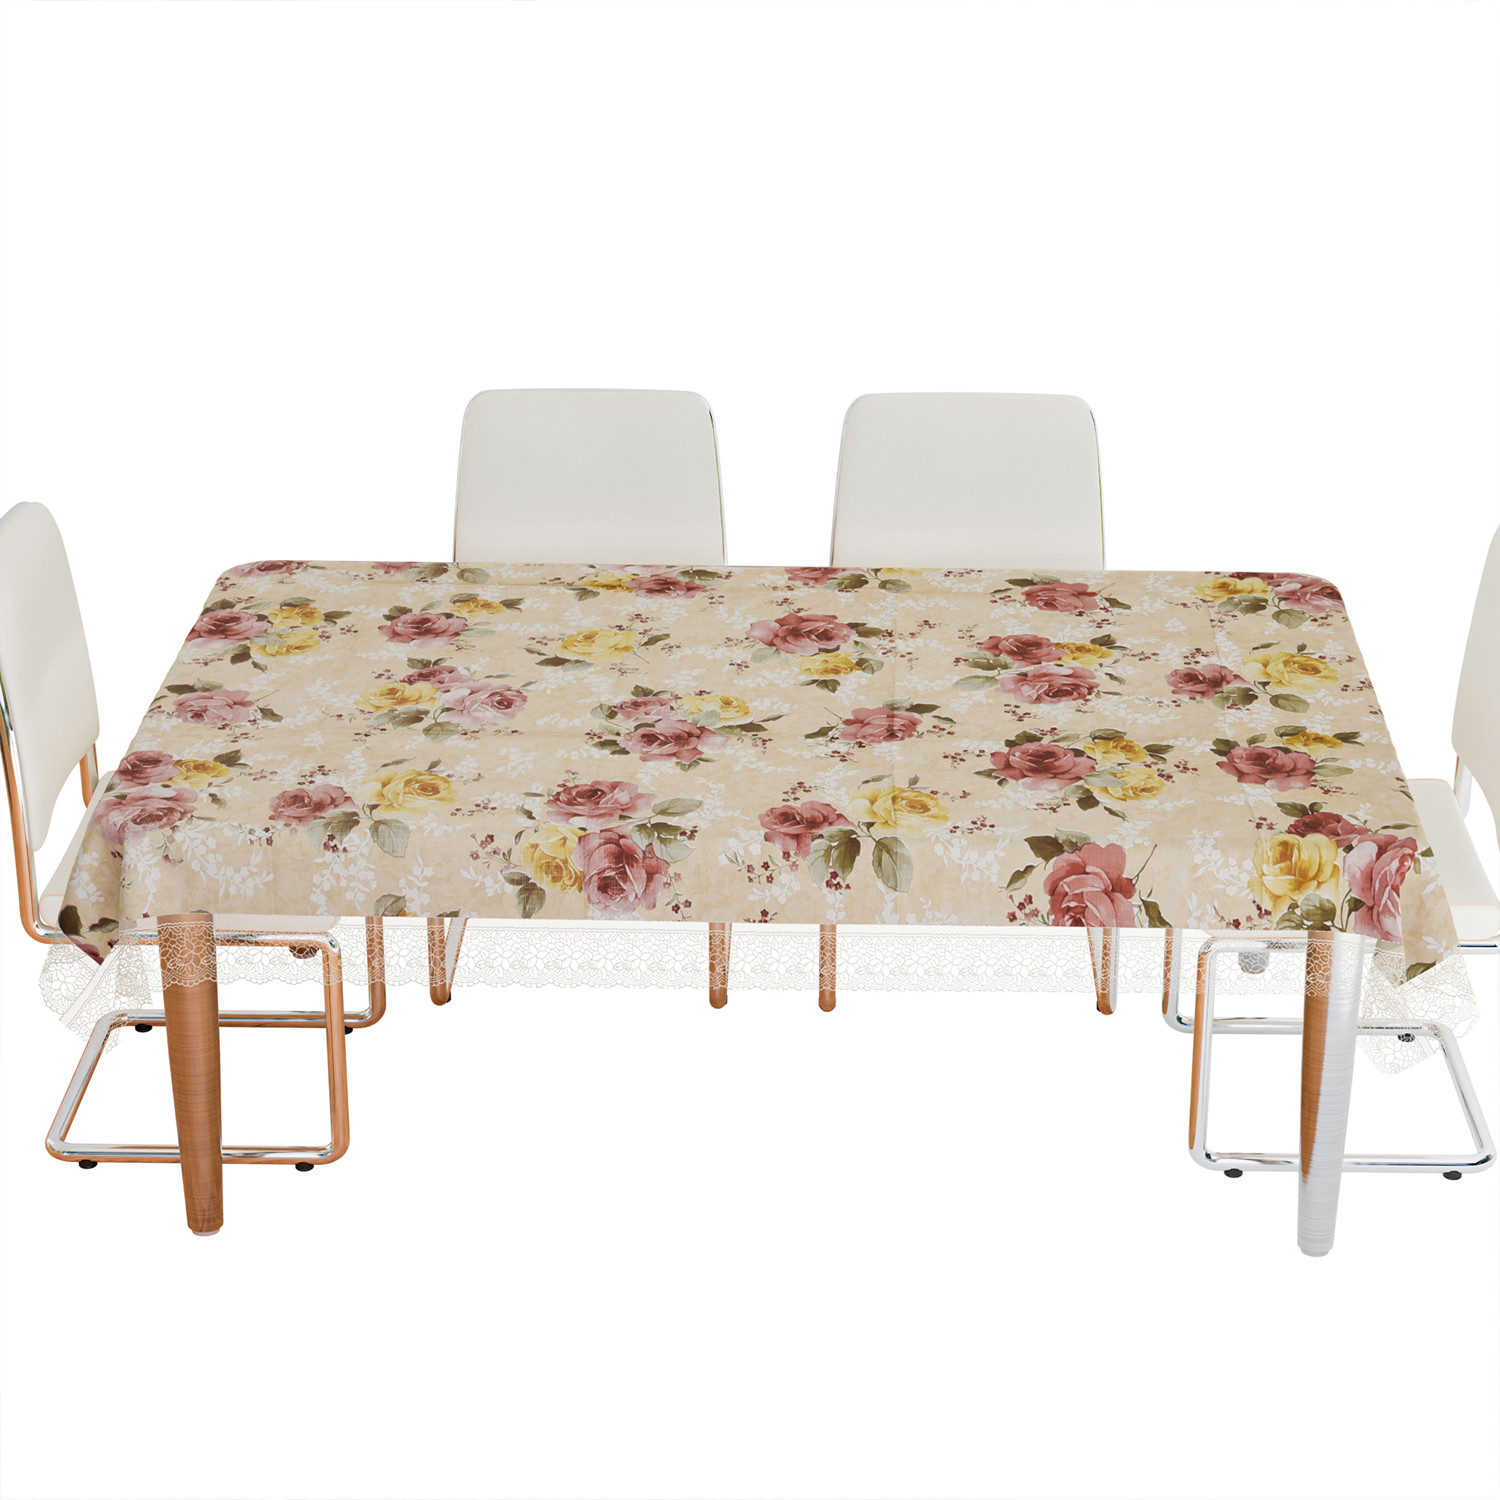 Kuber Industries Dining Table Cover | PVC Table Cover | Reusable Cloth Cover for Table Top | Flower Design Dining Table Cover | Table Protector Cover | 60x90 Inch | Beige